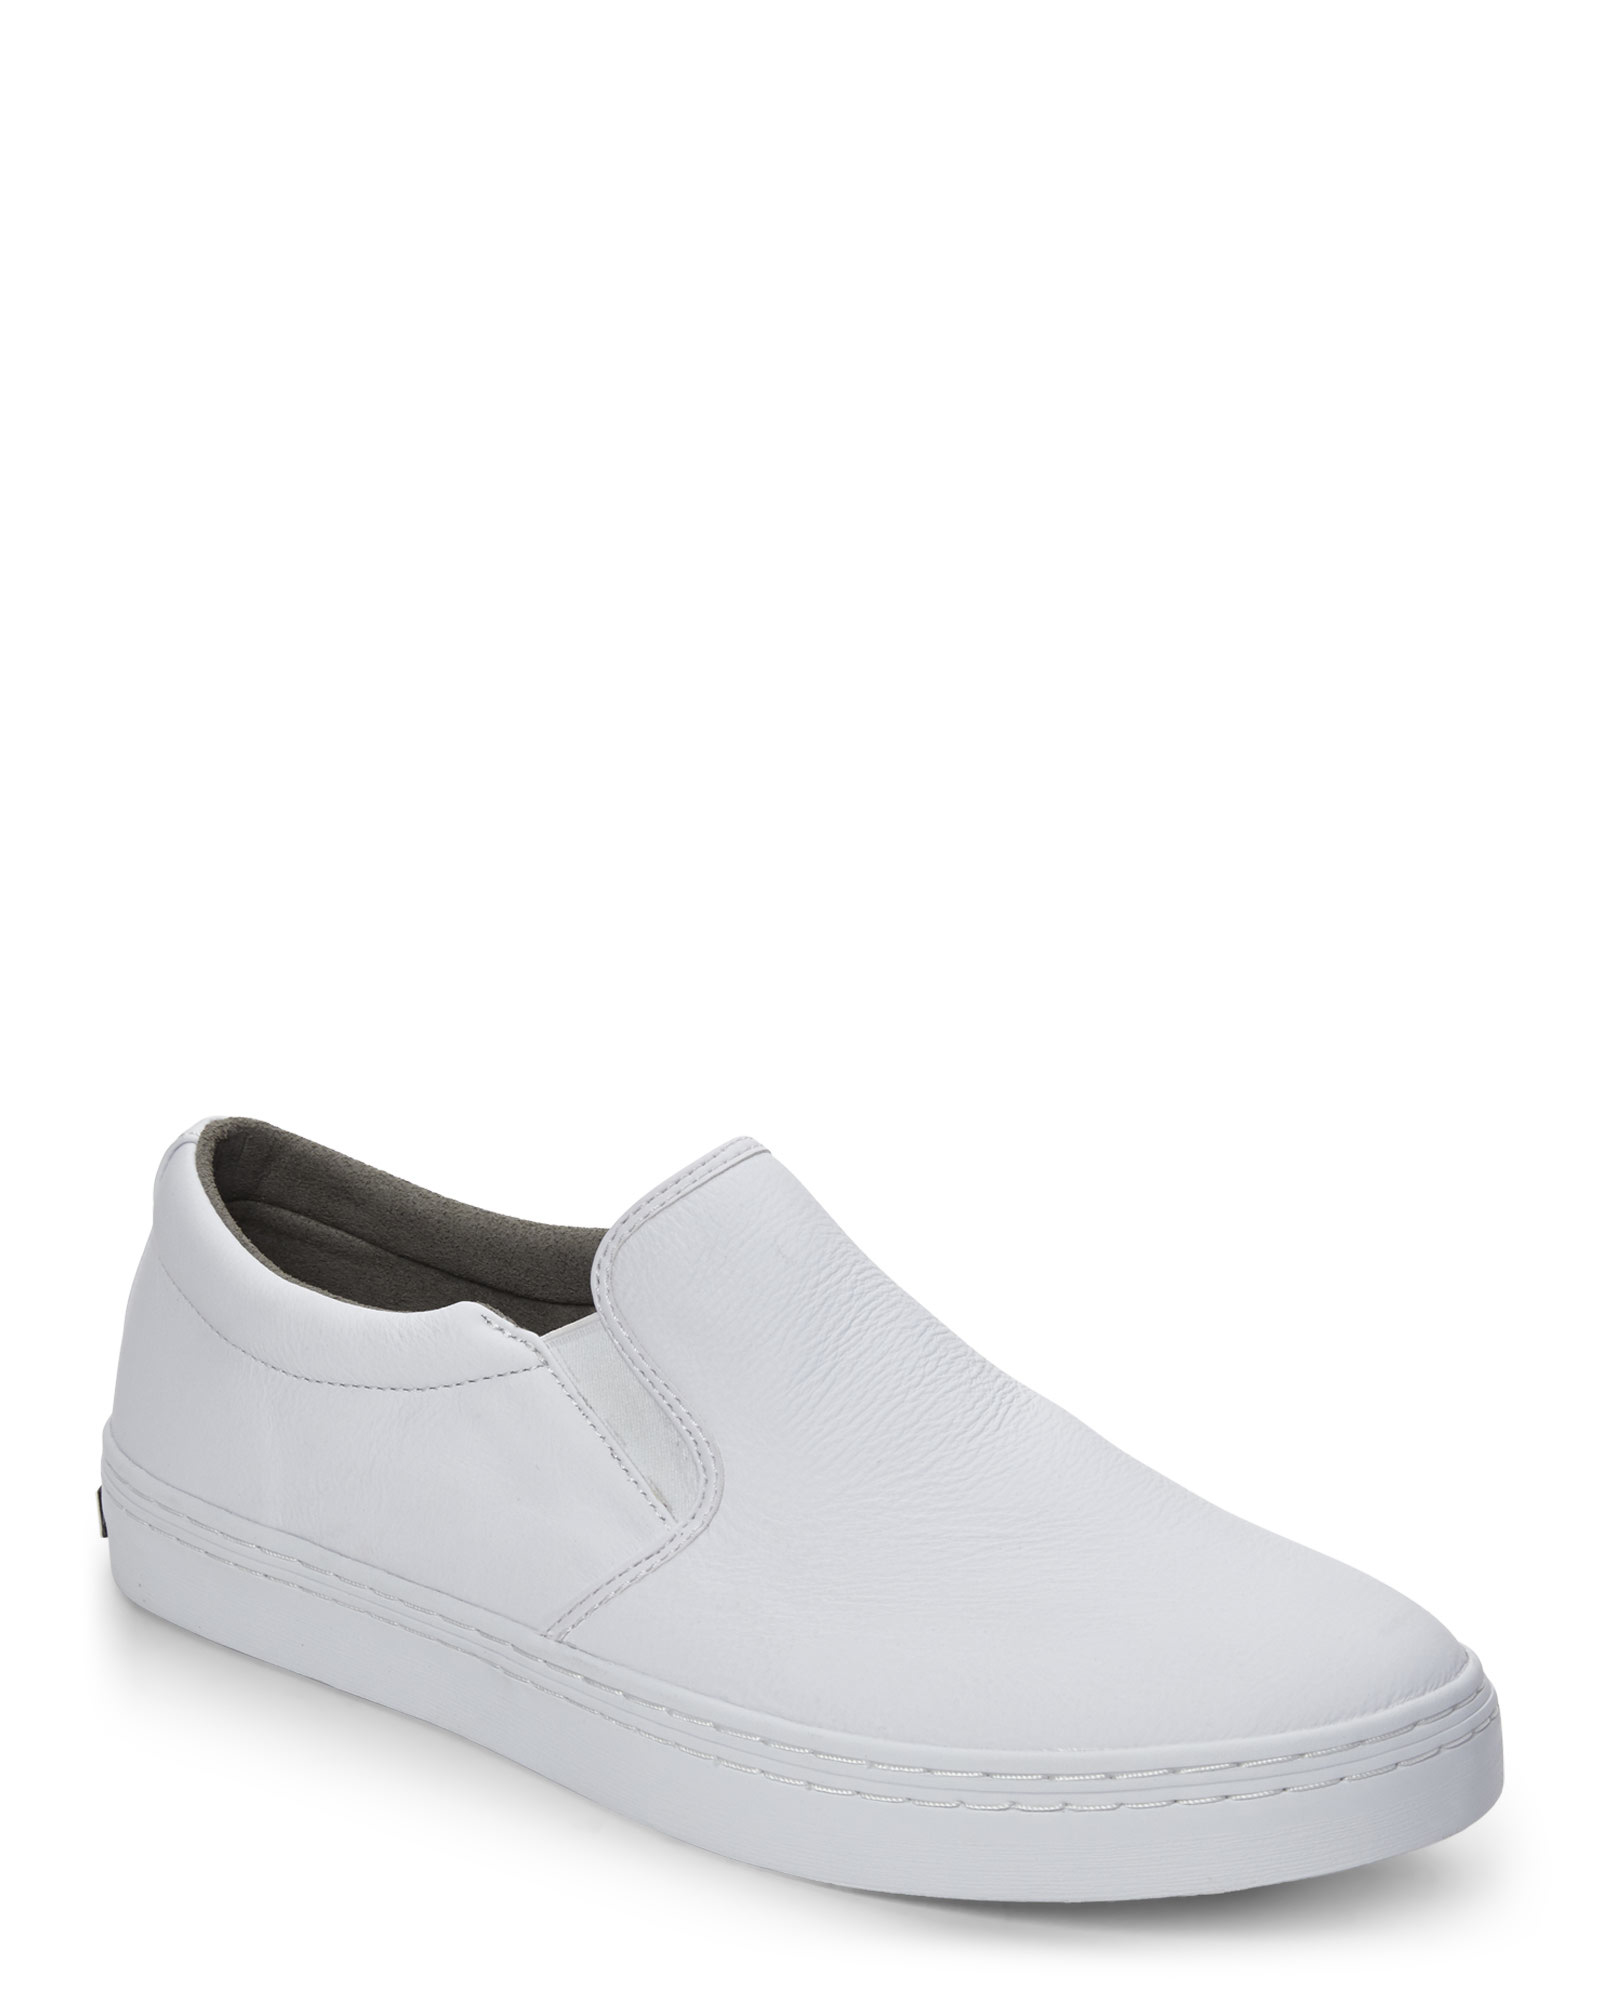 Lyst - Cole Haan White Falmouth Sneakers in White for Men